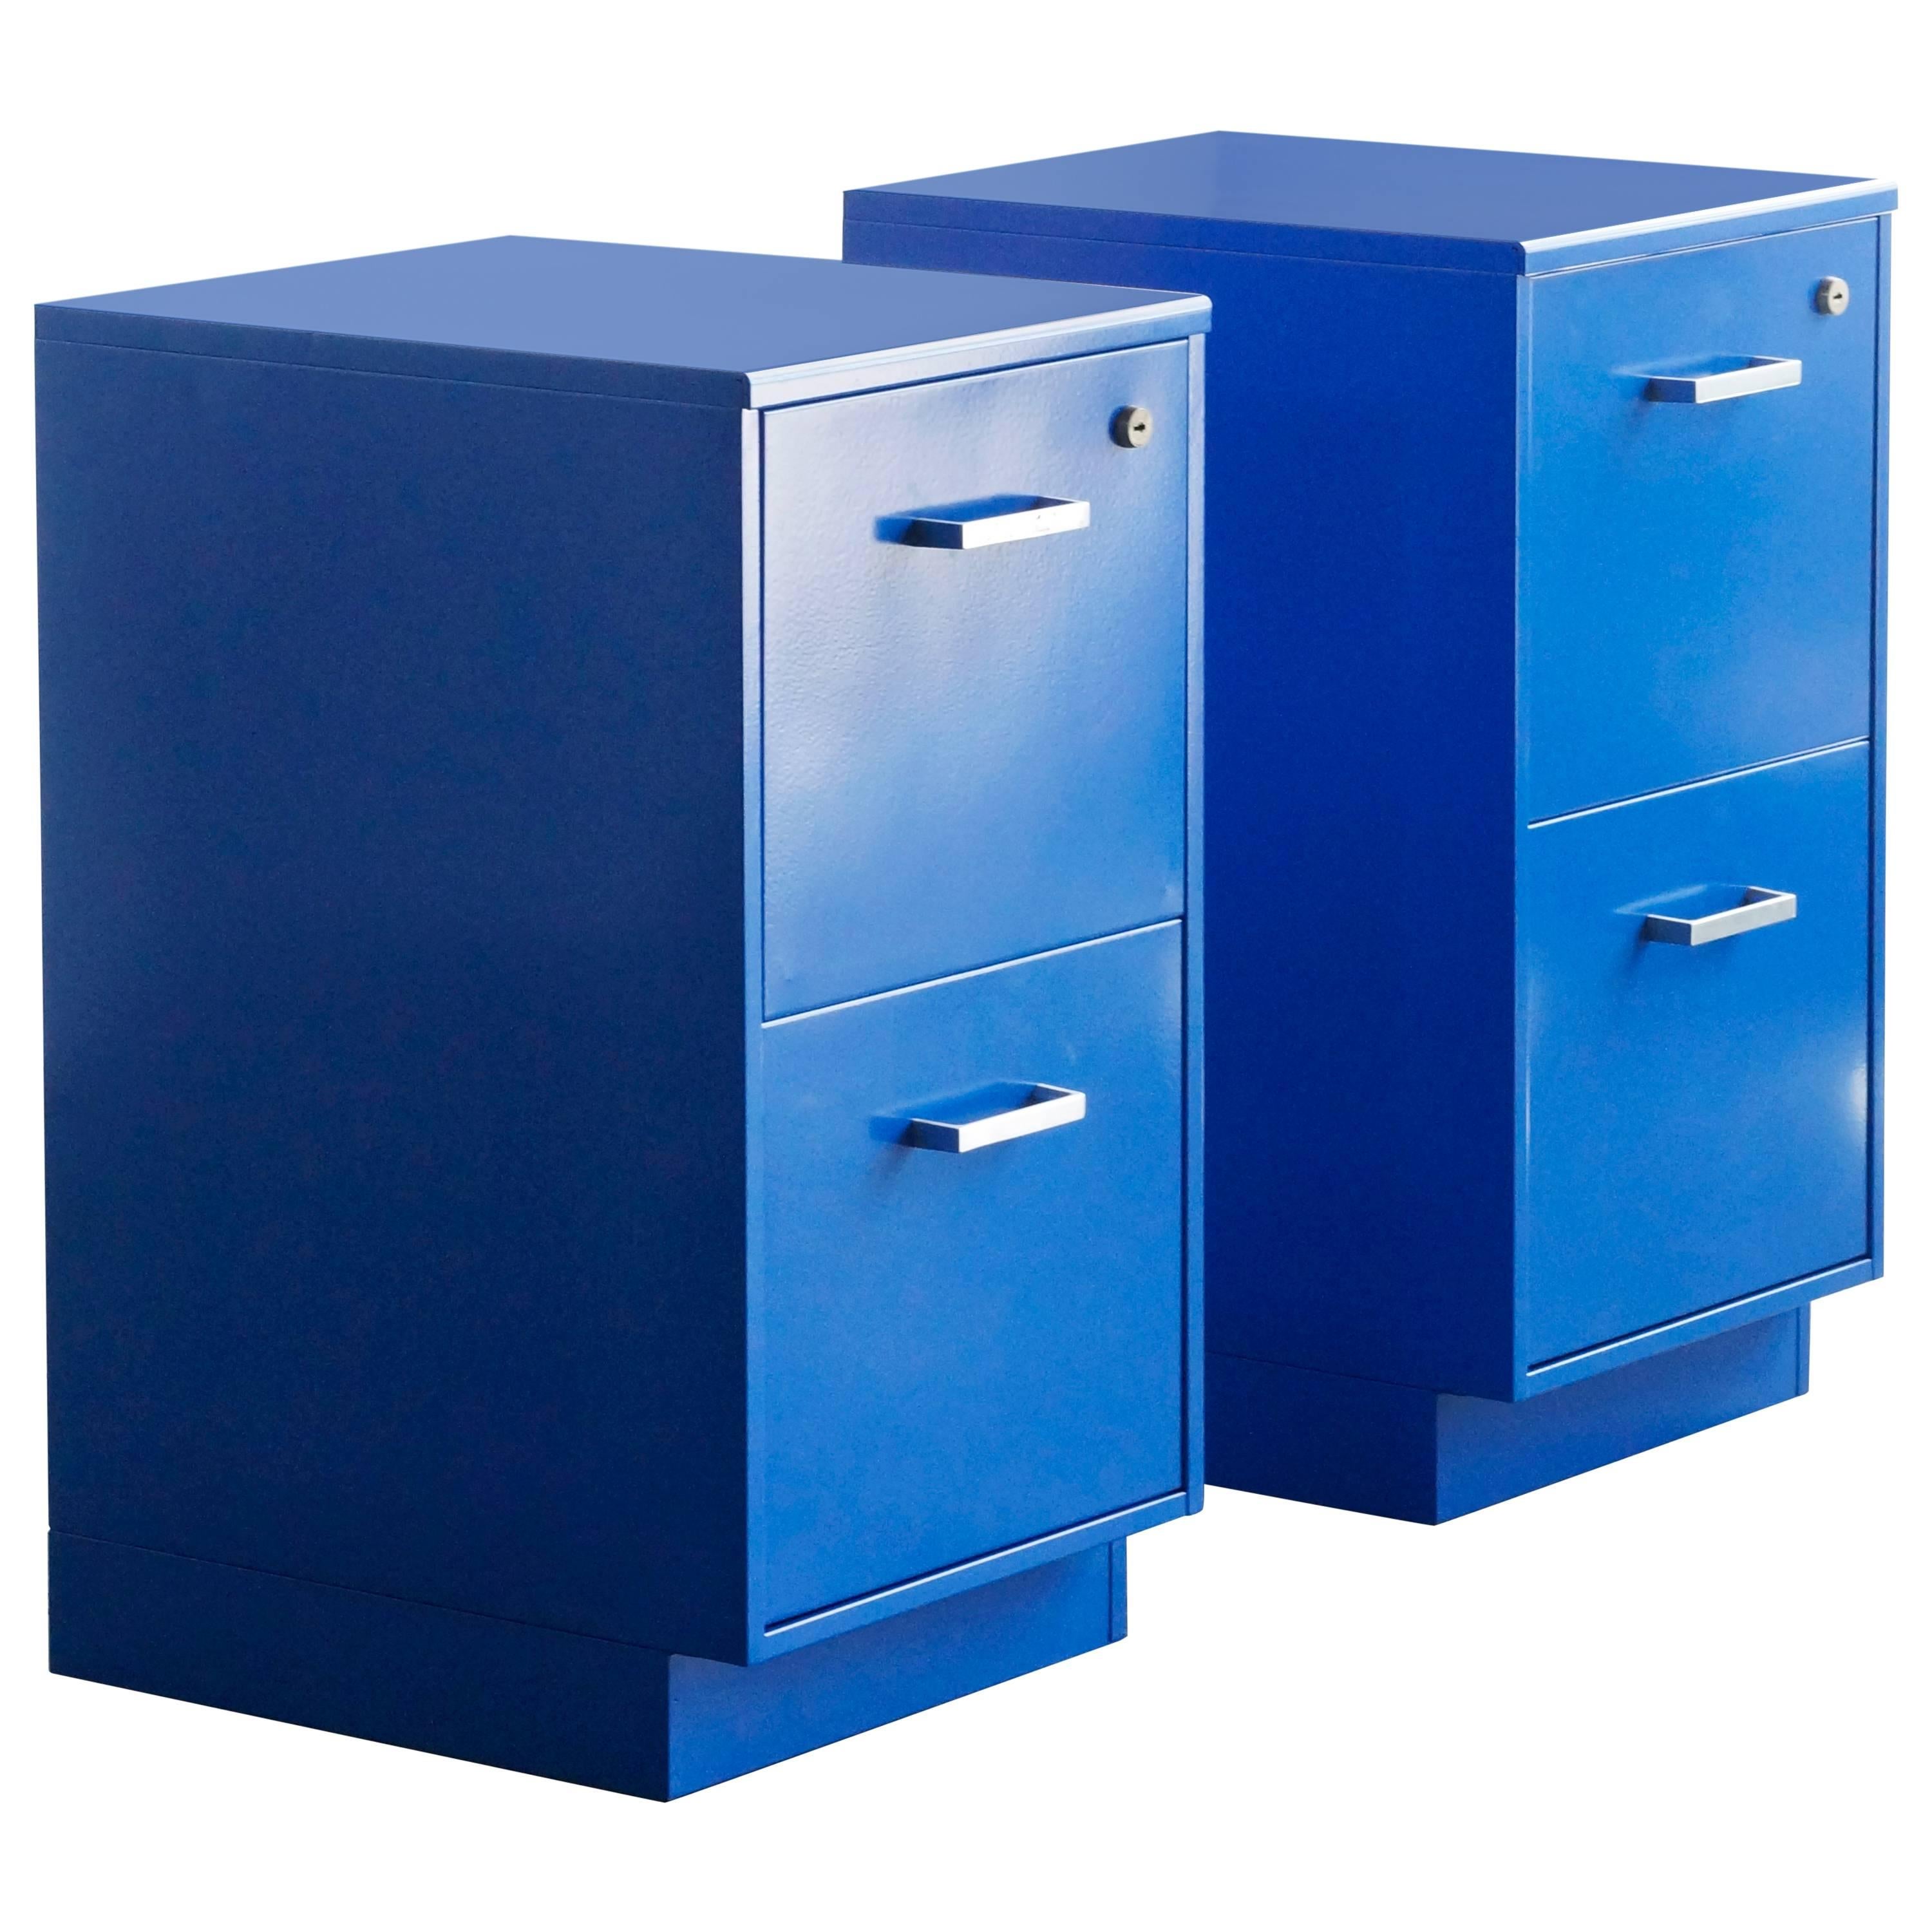 Vintage Steelcase File Cabinets, Refinished or Sold Separately